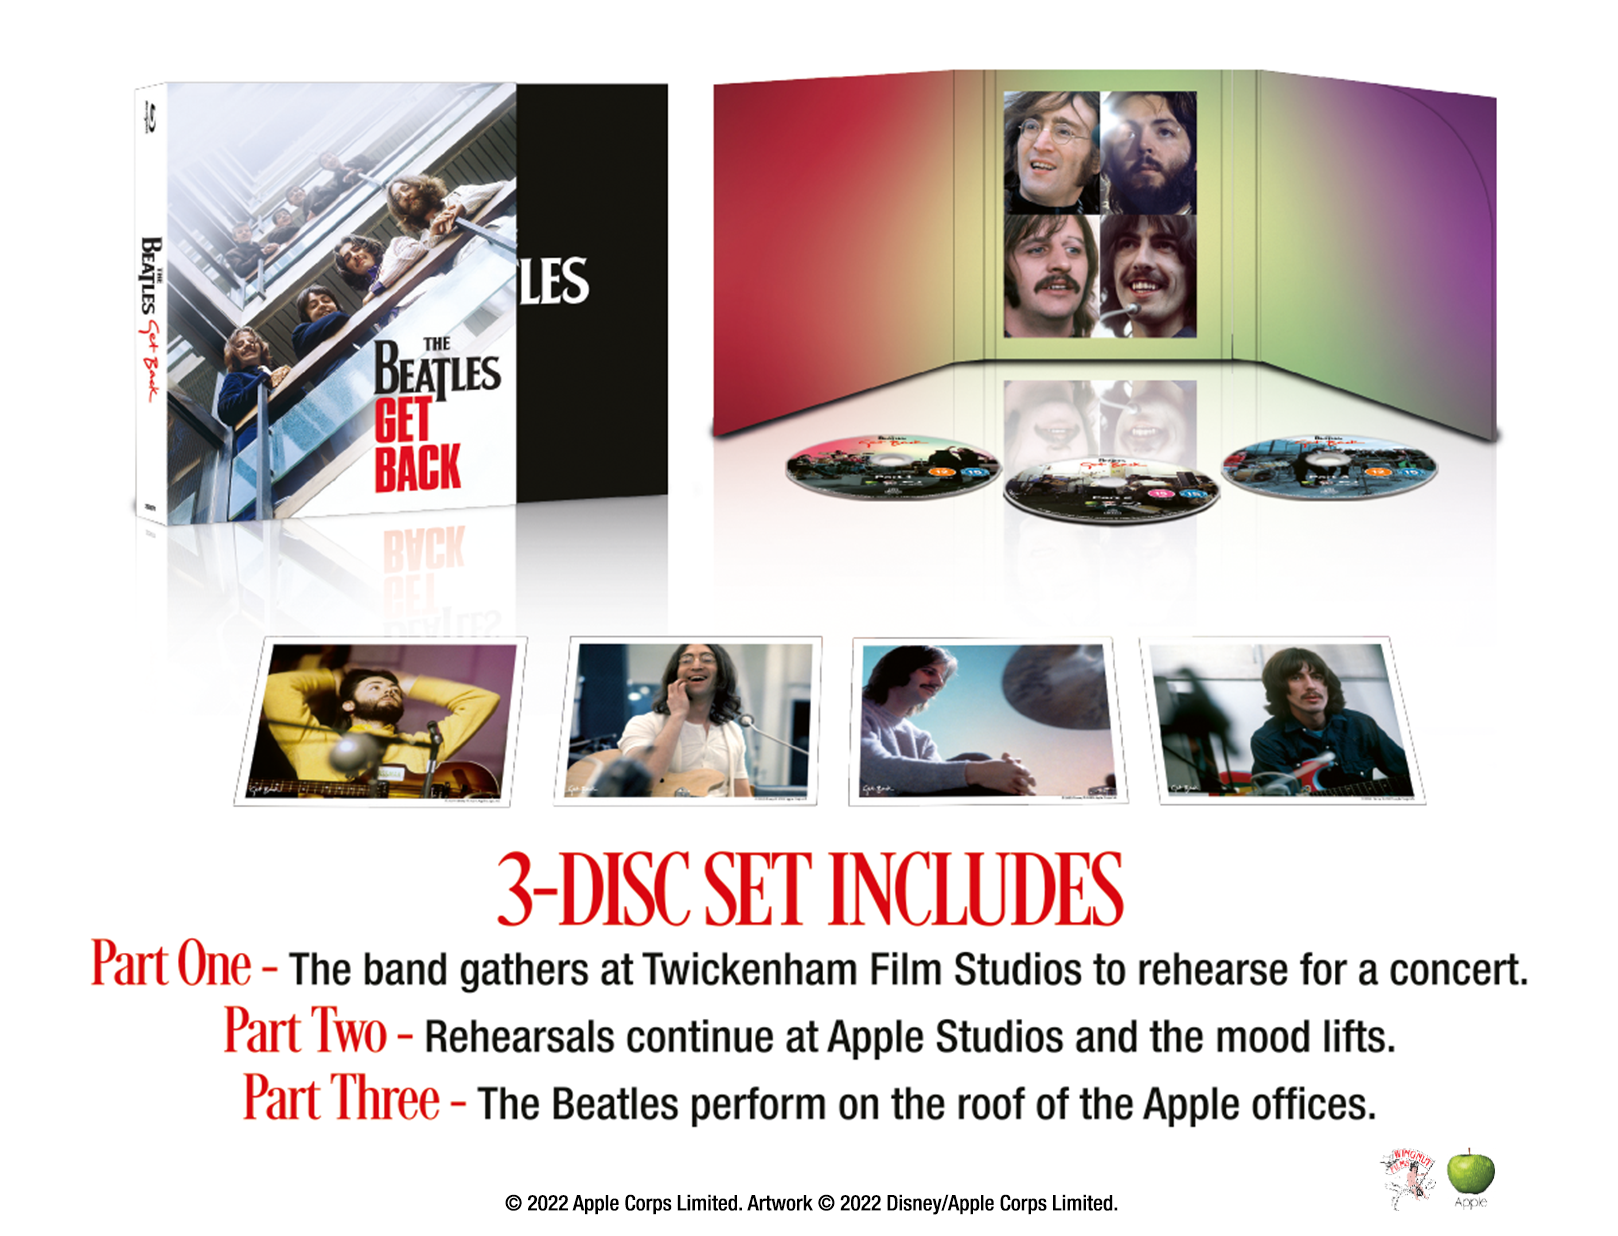 The Beatles - The Beatles: Get Back 3-Disc Blu-Ray Collector's Edition